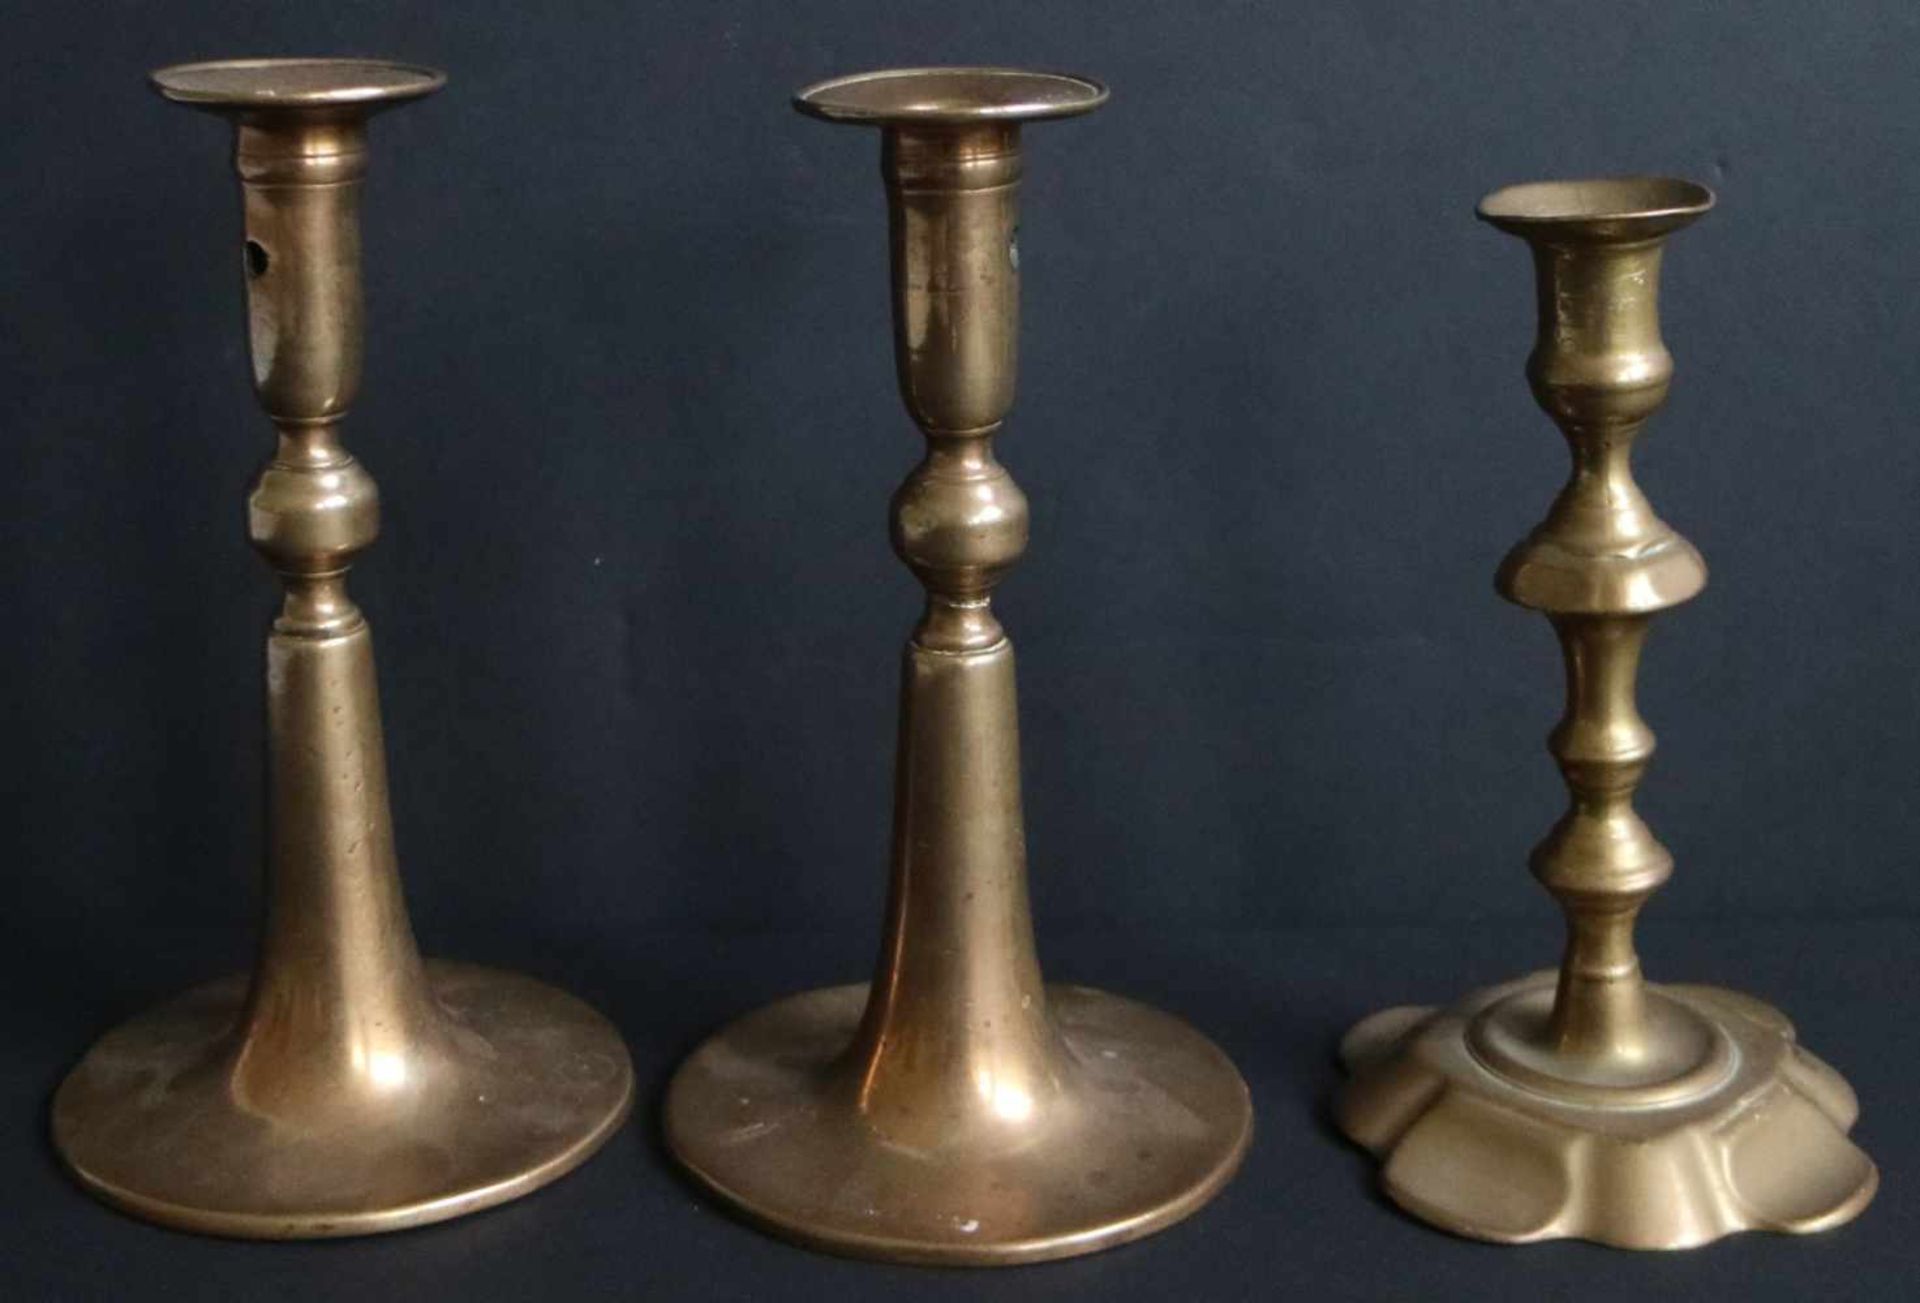 Lot of candlesticksIncluding set of trumpet candlesticks 18th centuryH 19, 5 and 21 cmLot of